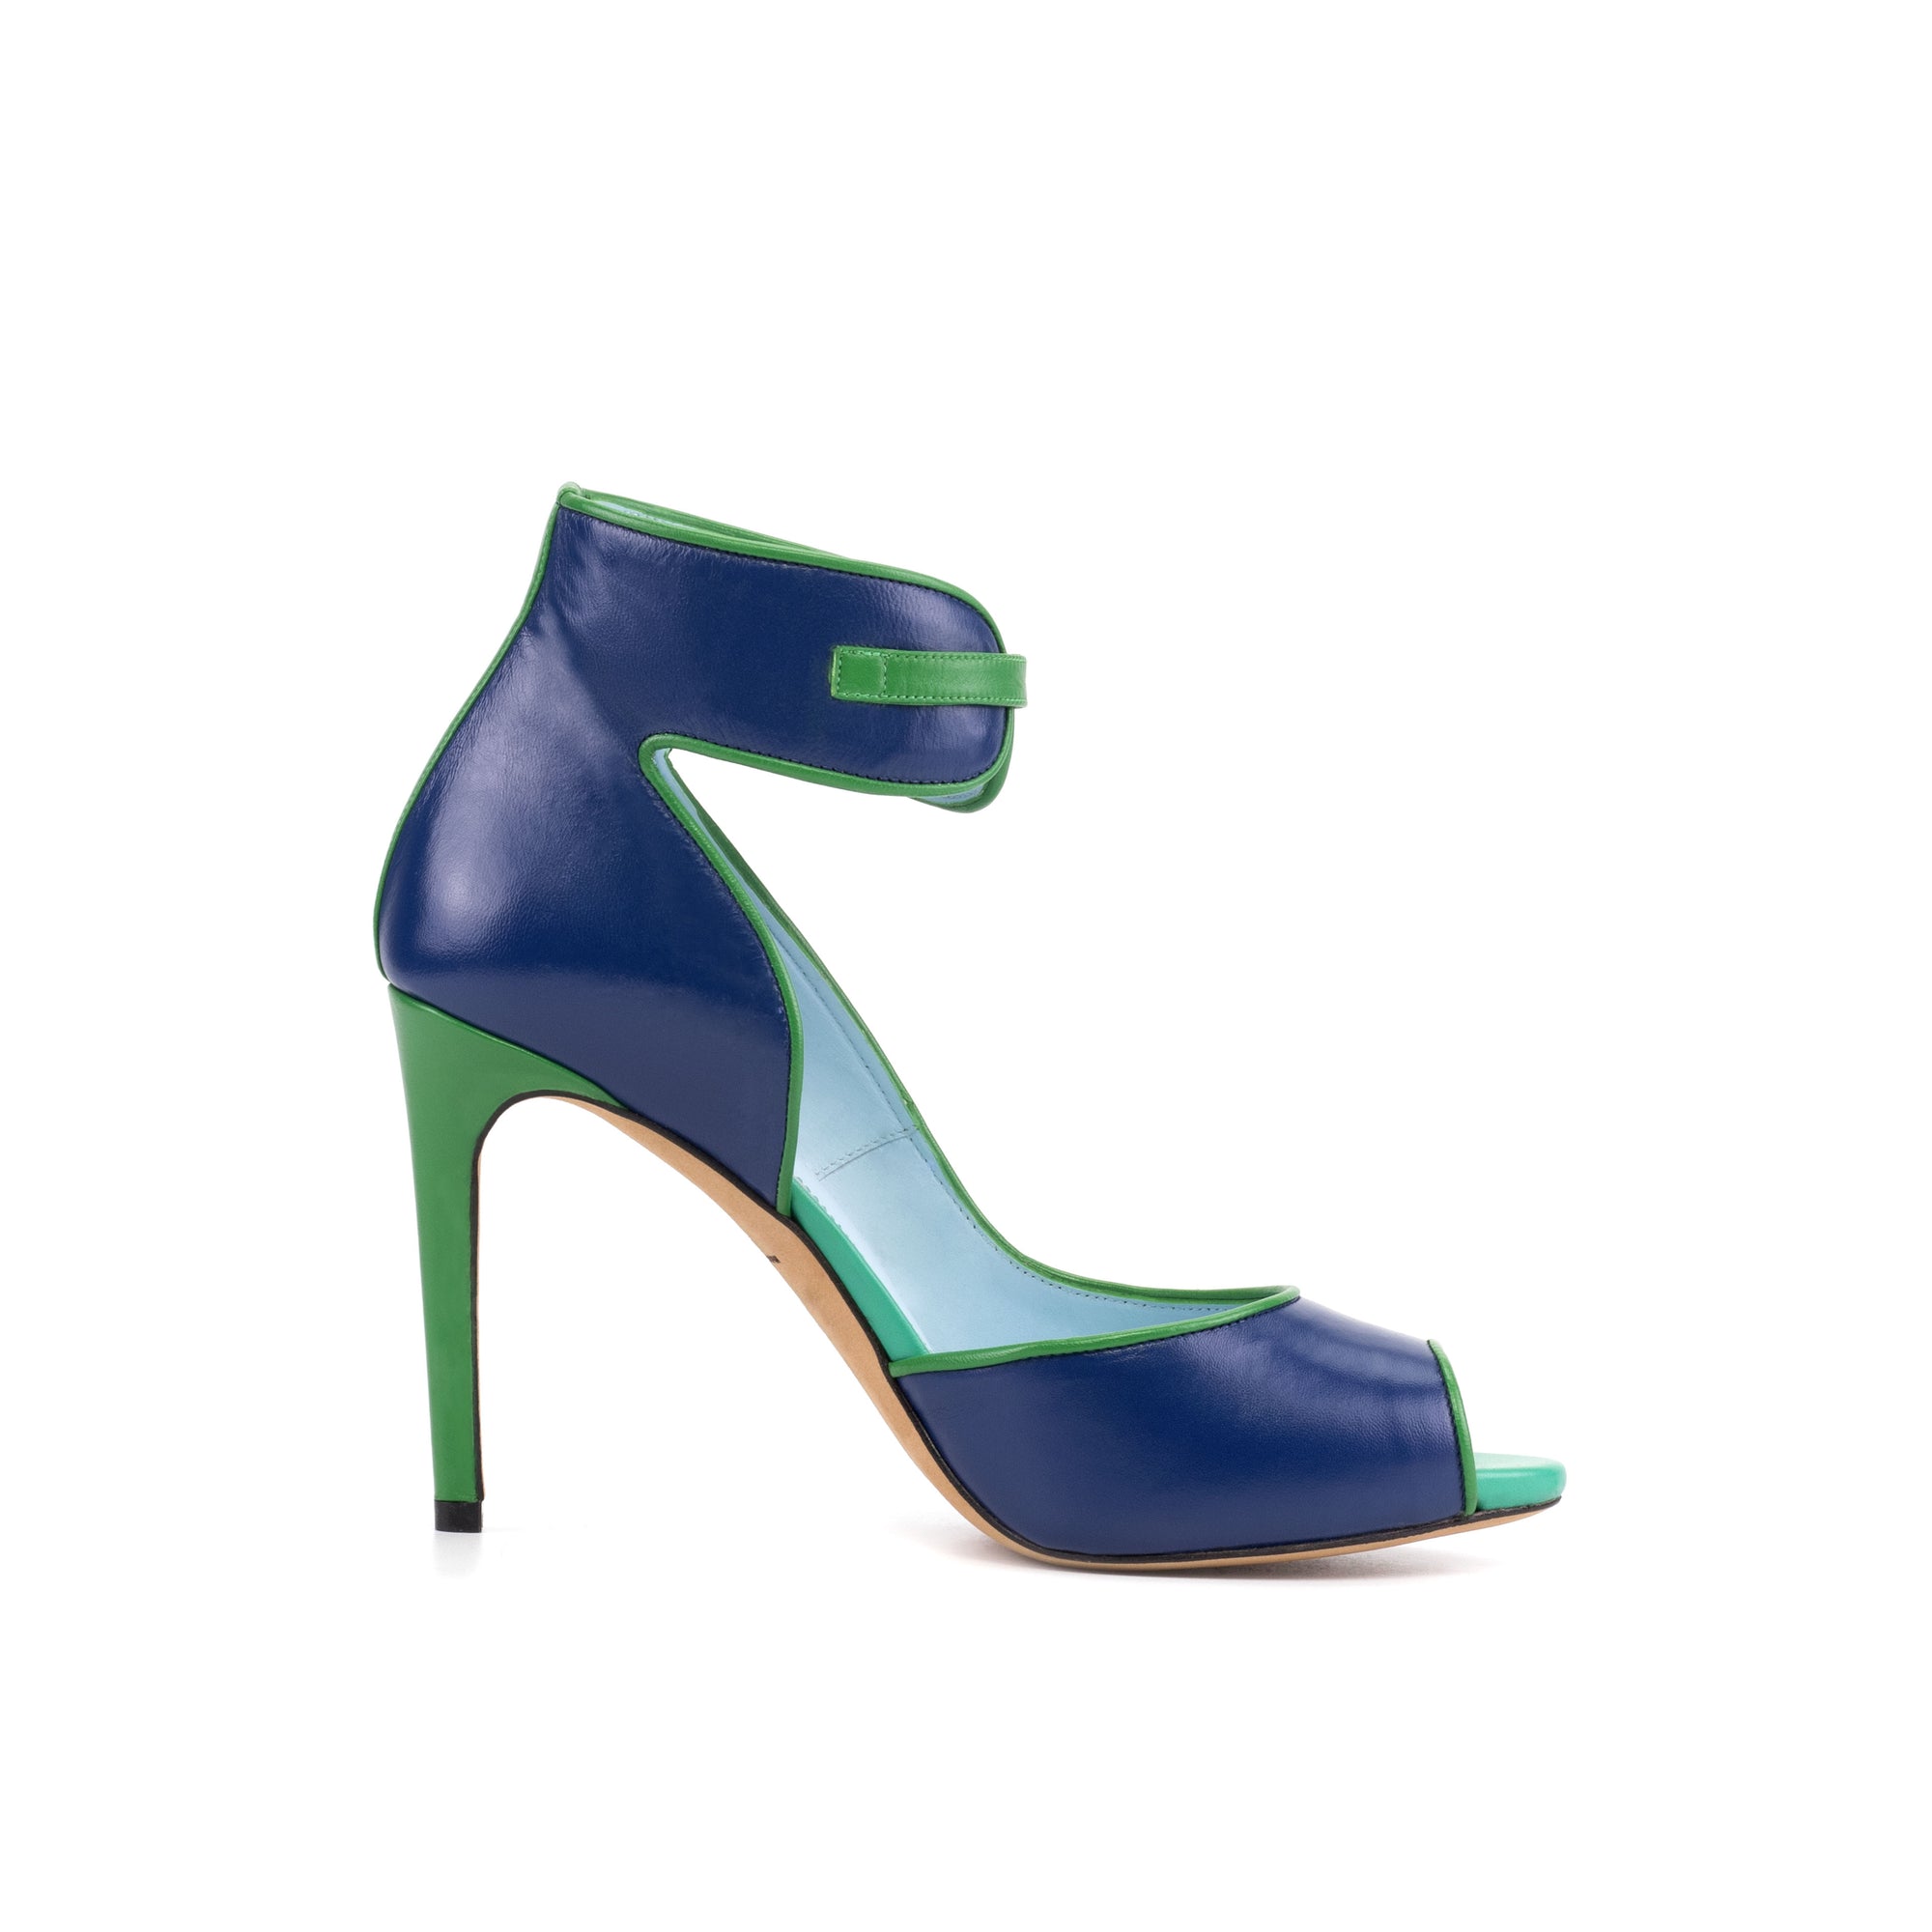 Handmade Ankle Cuff Heels in Blue Nappa Leather